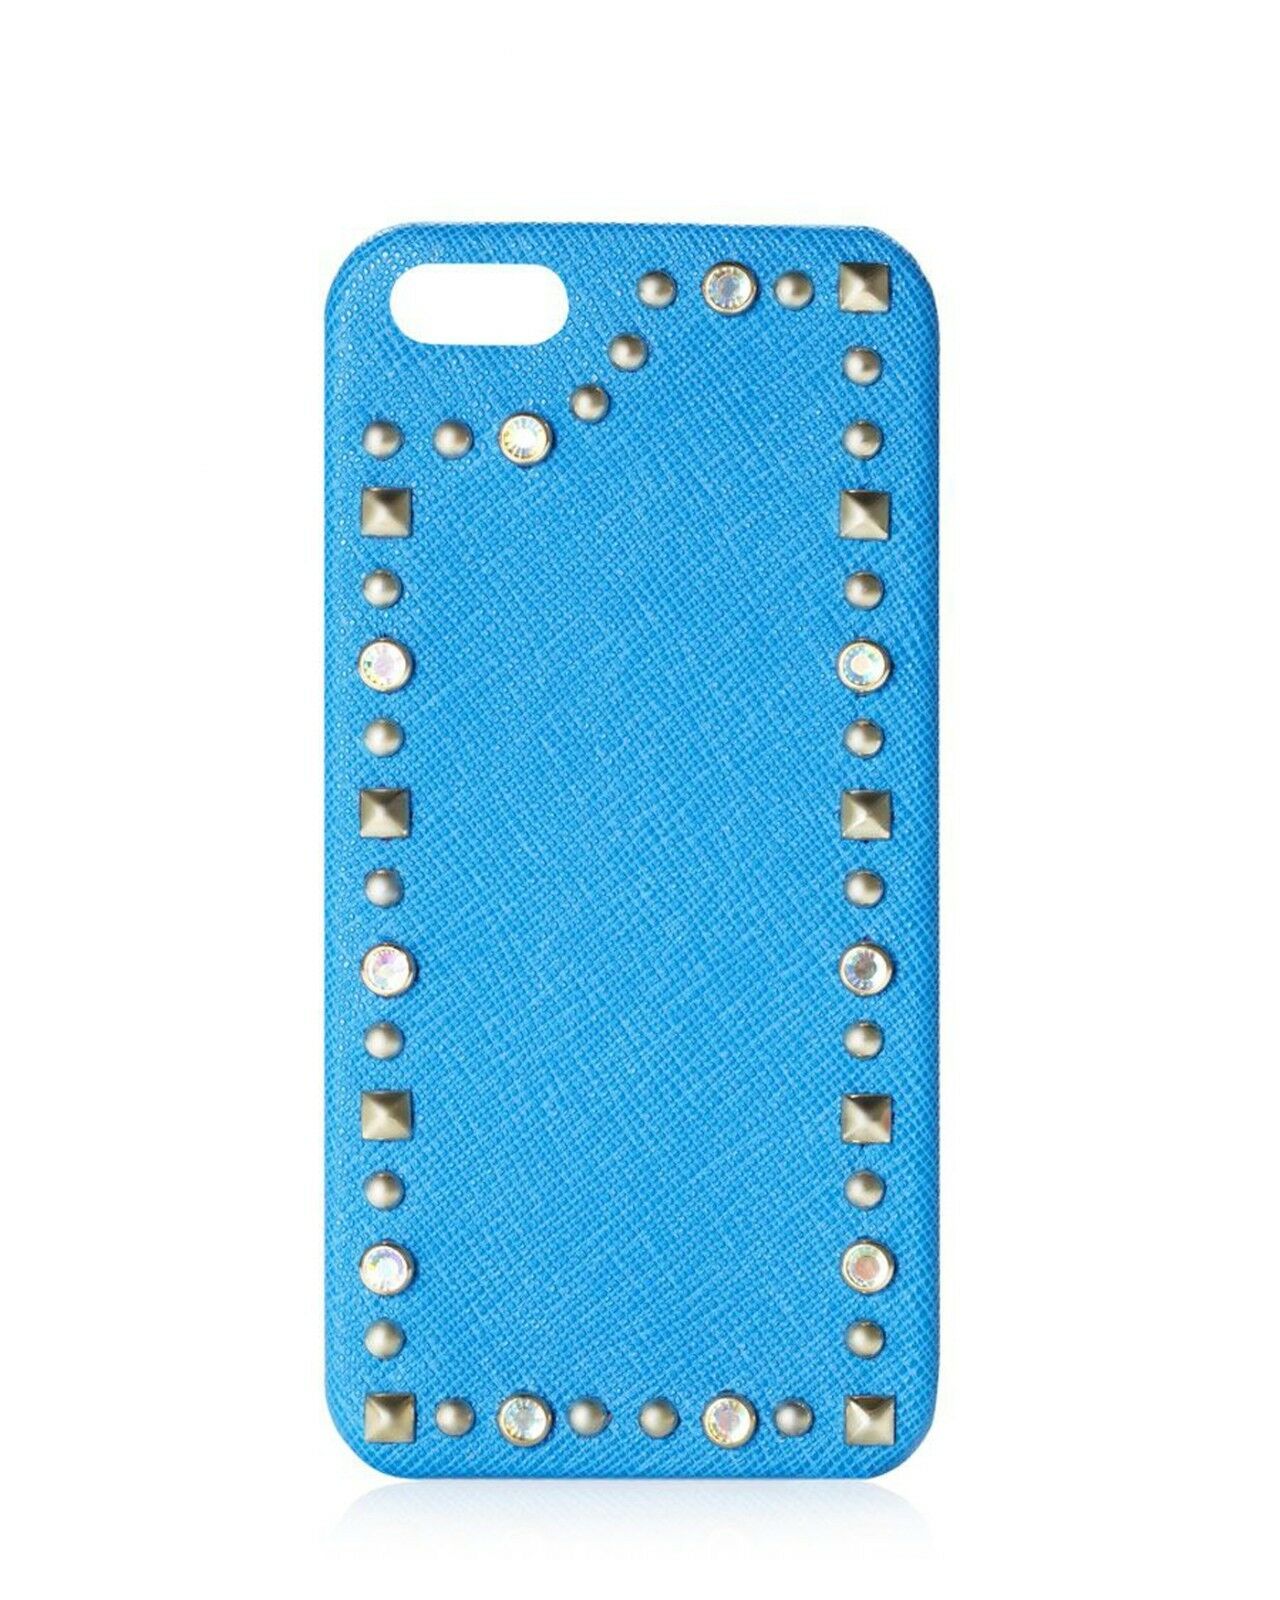 Juicy Couture Leather Jeweled Turquoise Saffiano iPhone 5 Hard Shell Case NWT